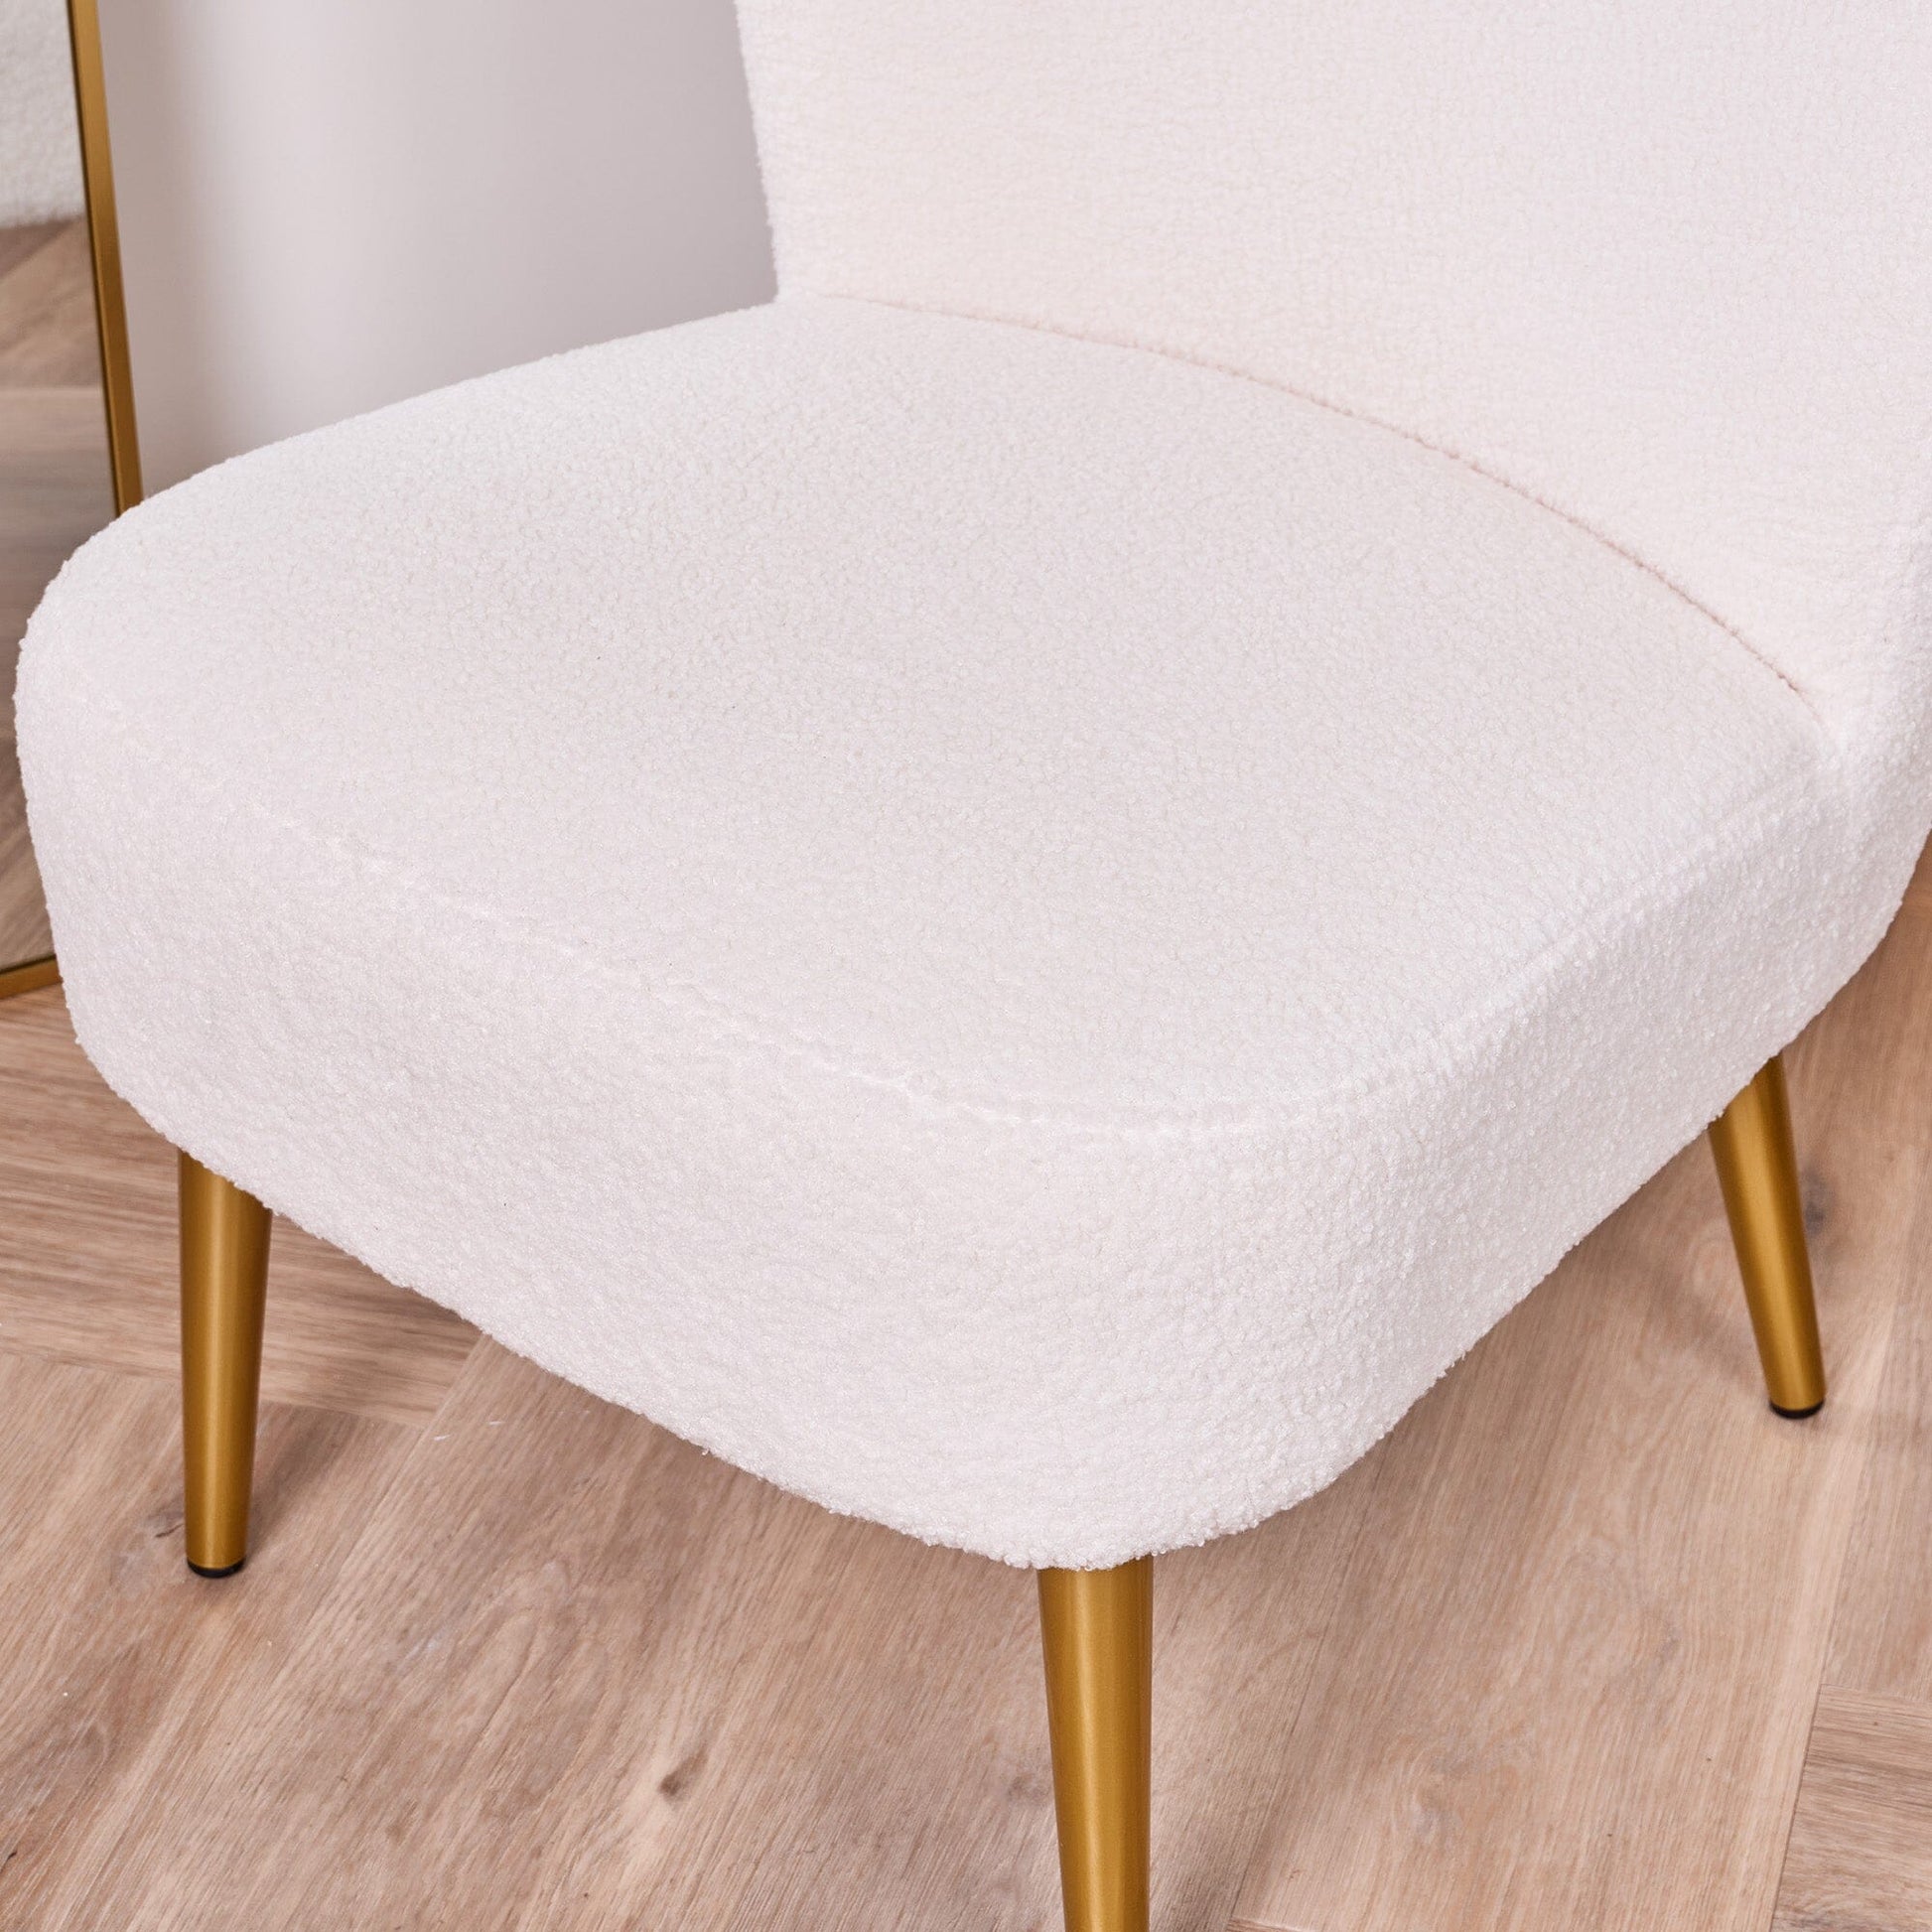 Hattie accent chair - cream boucle with gold legs